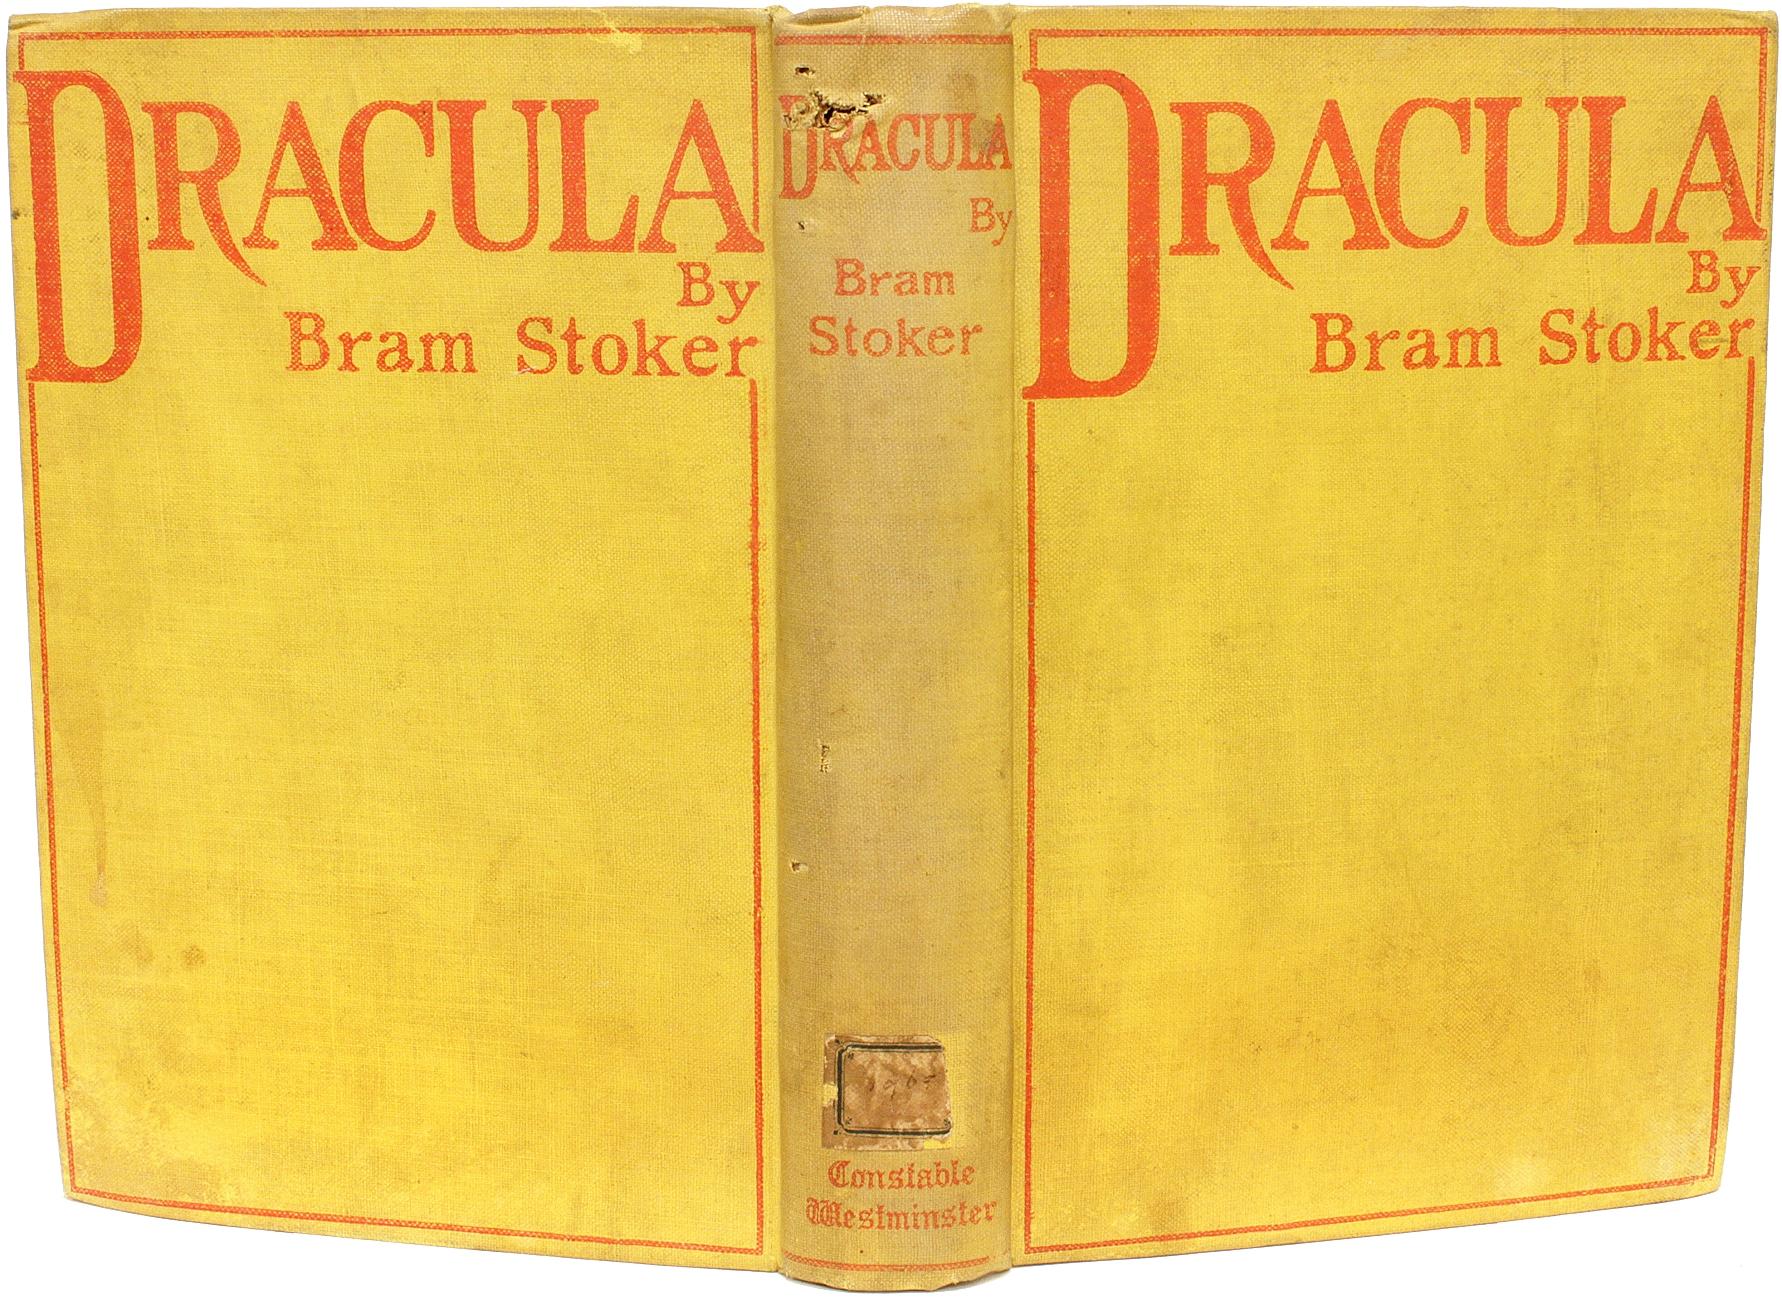 Author: STOKER, Bram. 

Title: Dracula. 

Publisher: London: Archibald Costable, 1897.

FIRST EDITION SECOND PRINTING. 1 vol., with the 1 page 